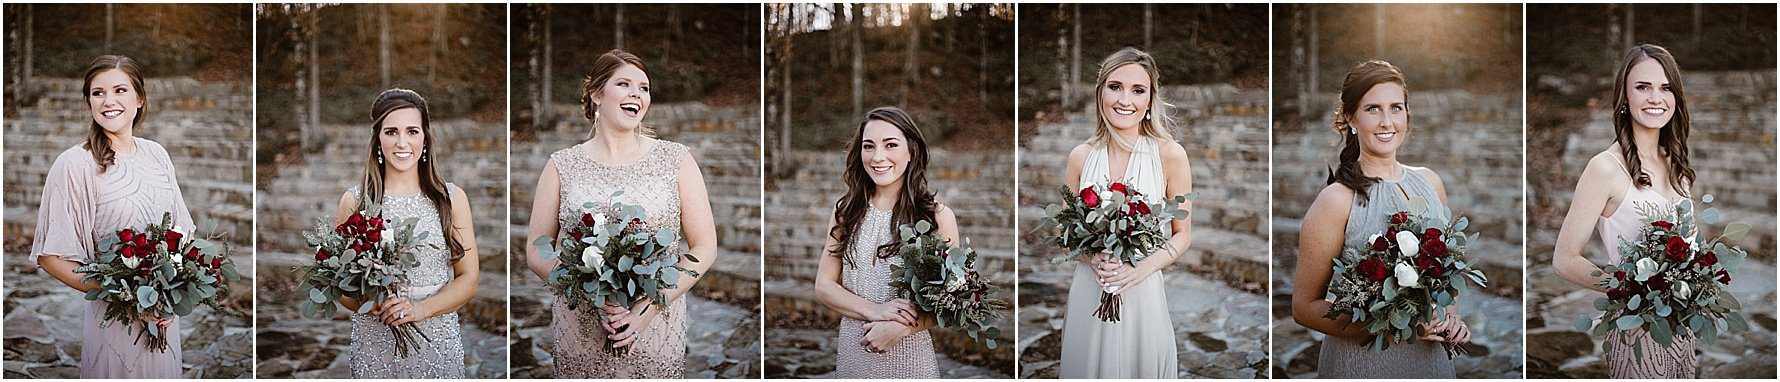 Winter Wedding at Dara's Garden in Knoxville | Erin Morrison Photography www.erinmorrisonphotography.com